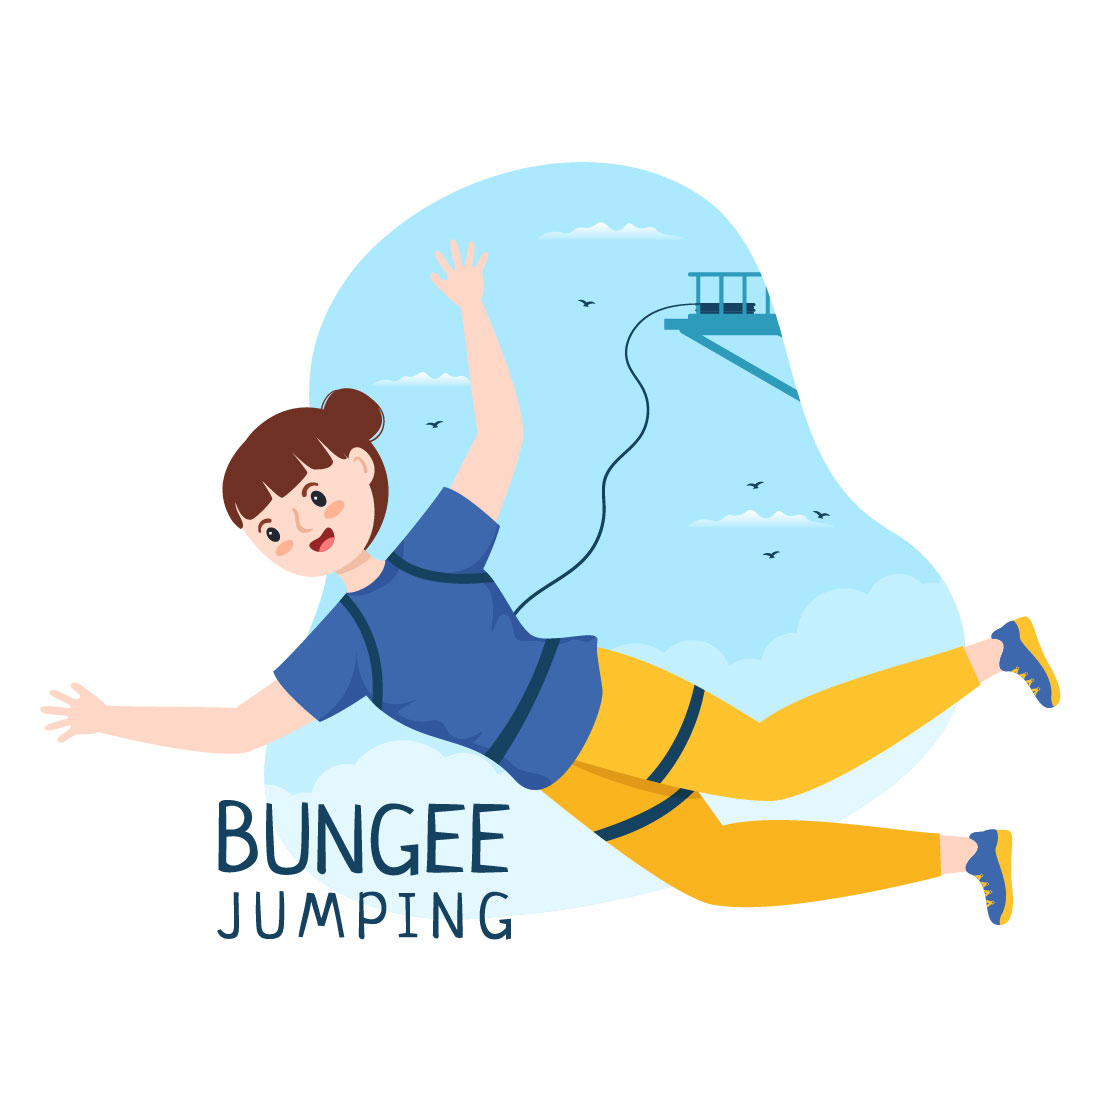 12 Bungee Jumping Illustration cover image.